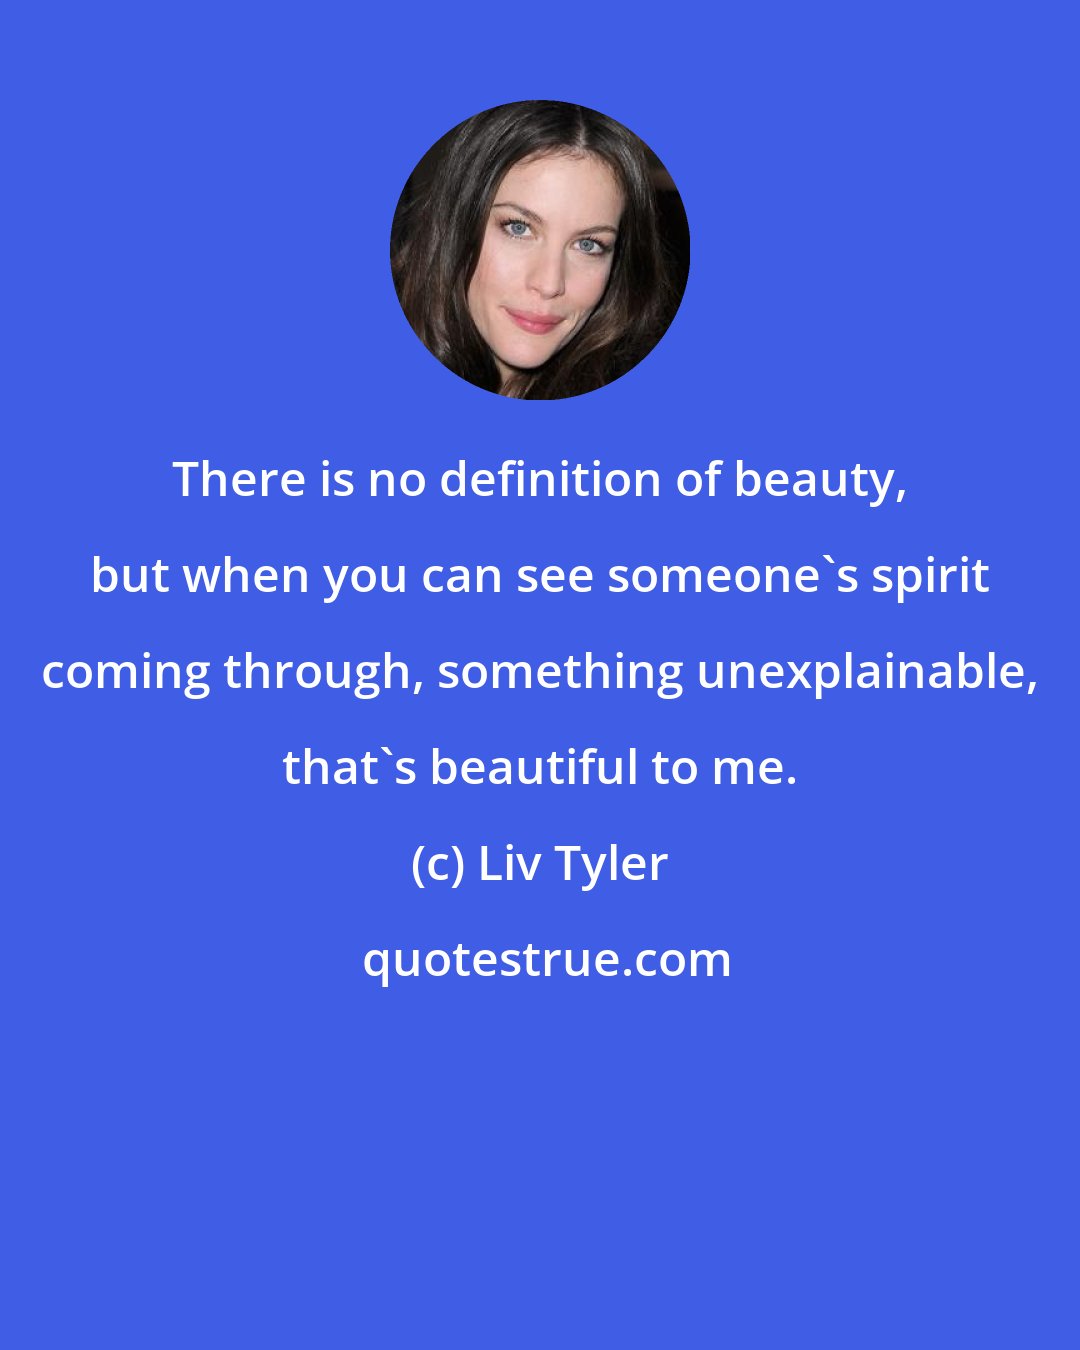 Liv Tyler: There is no definition of beauty, but when you can see someone's spirit coming through, something unexplainable, that's beautiful to me.